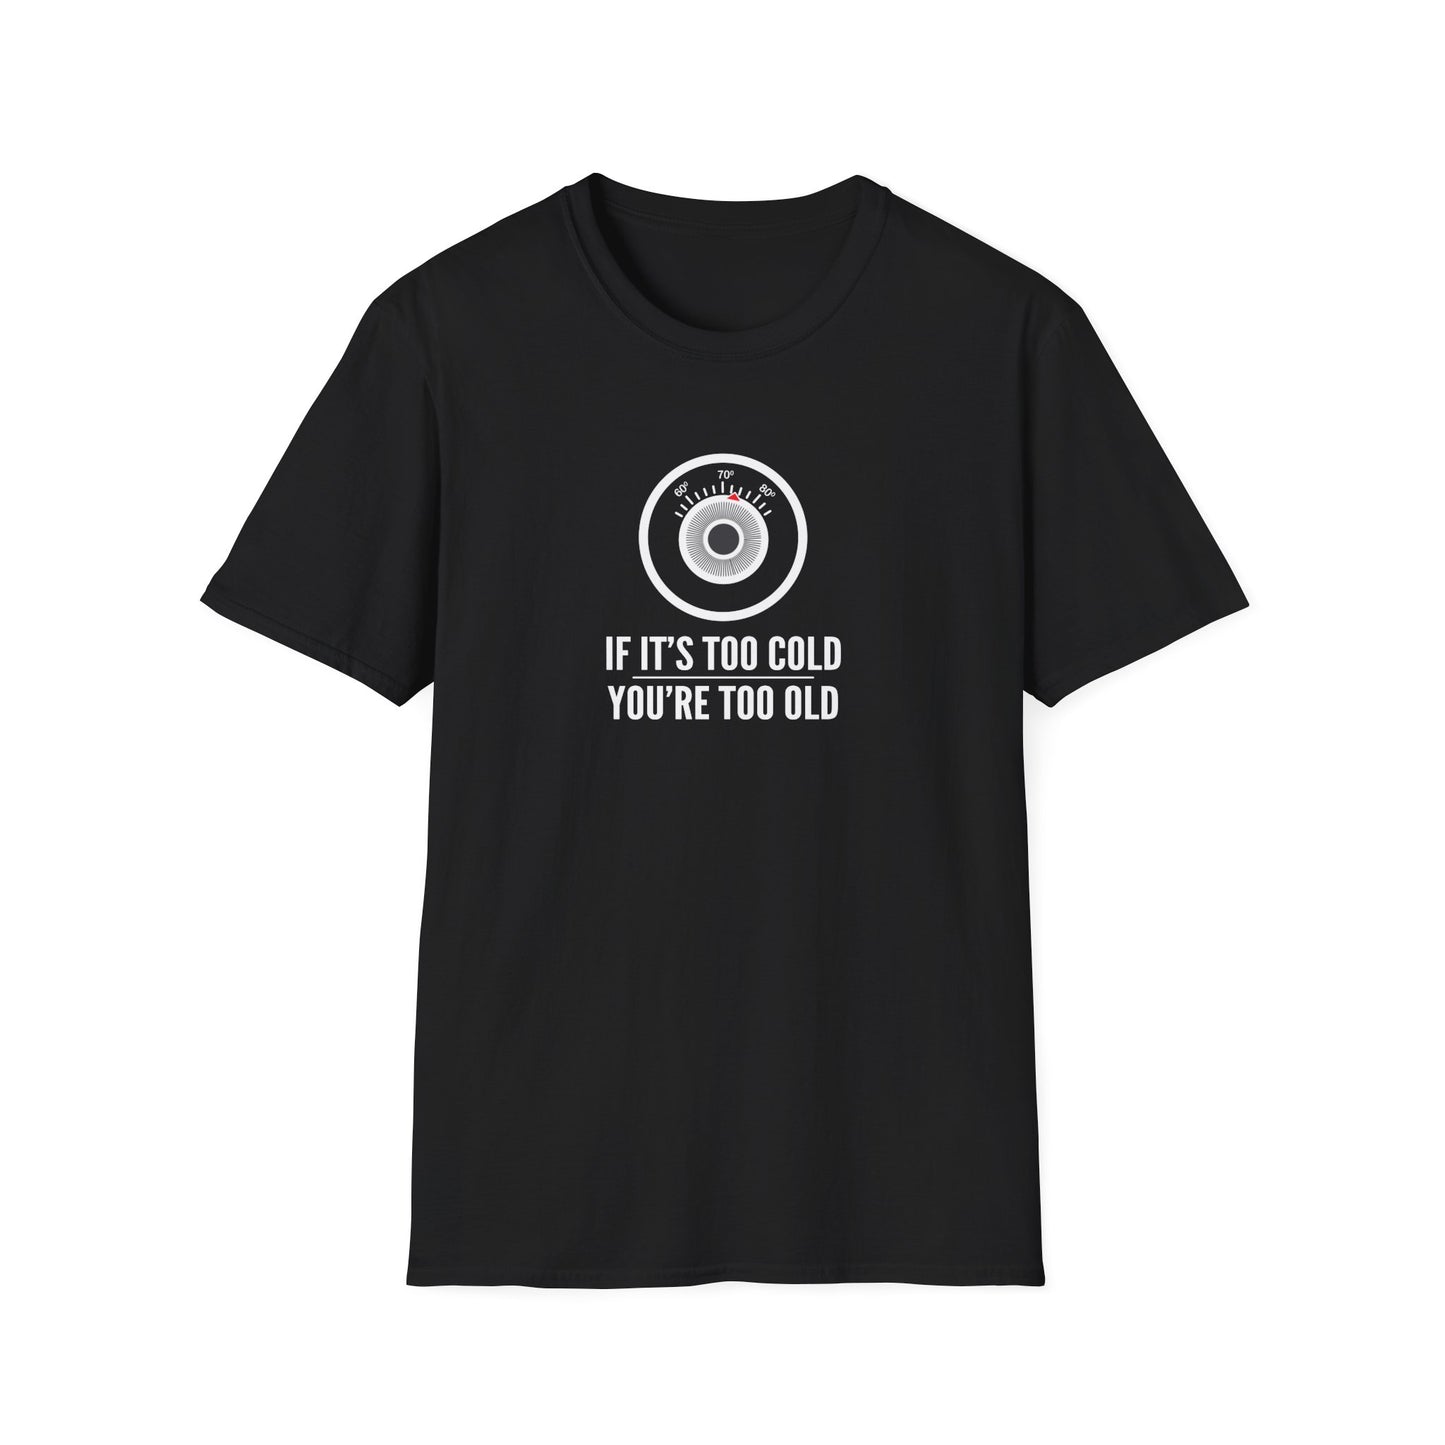 You're Too Old - T-Shirt